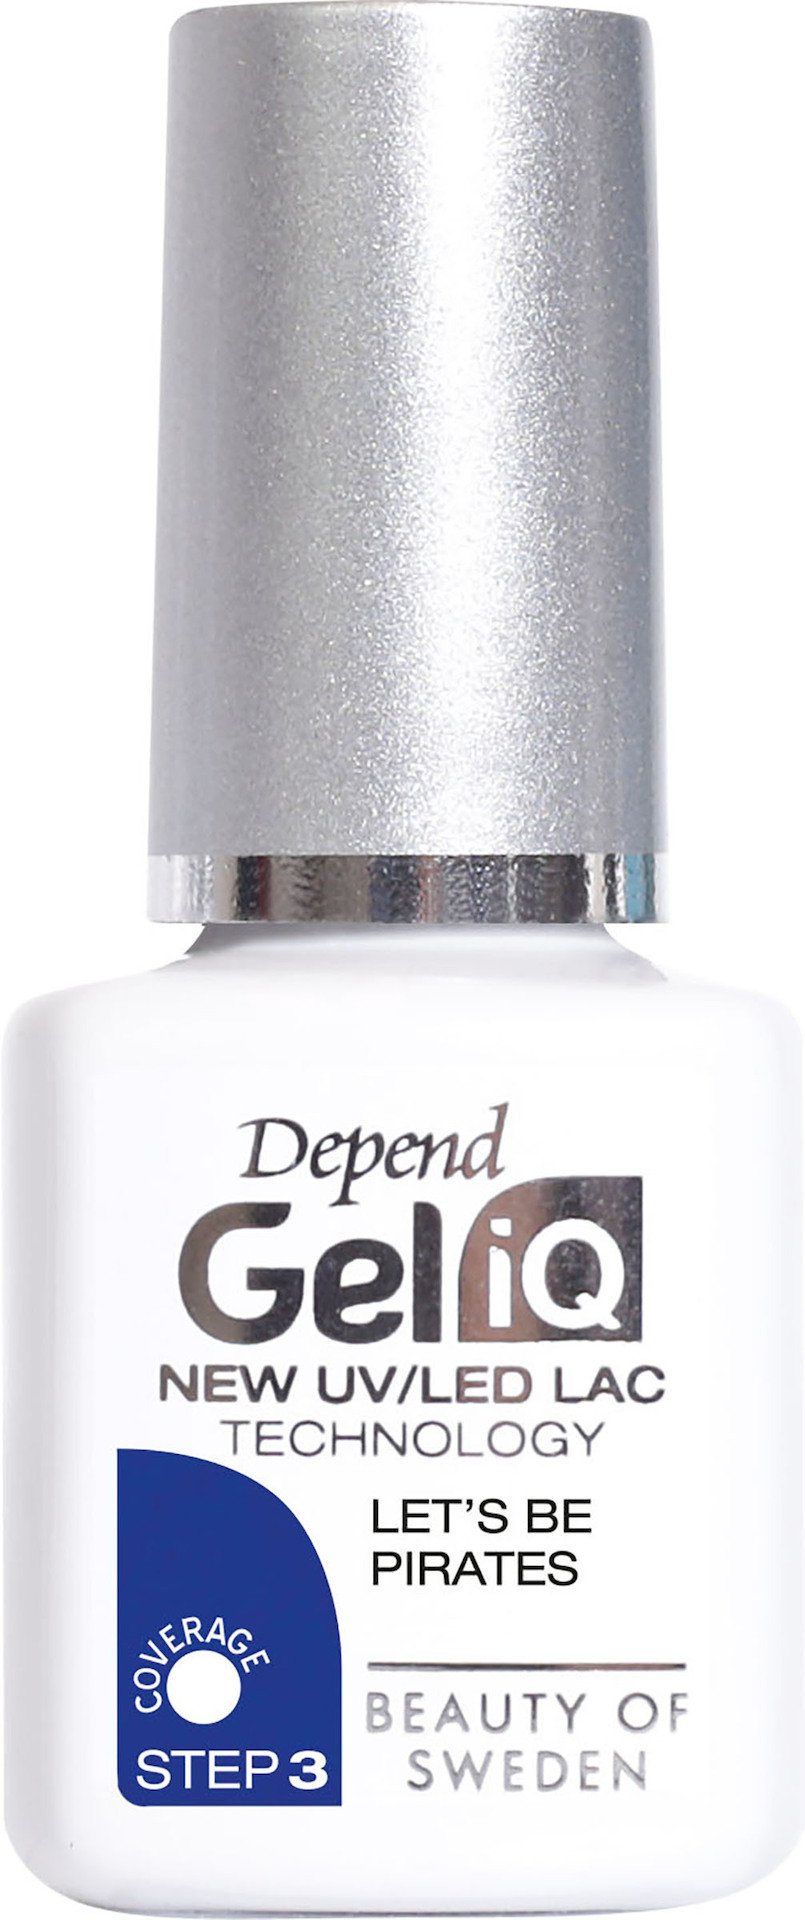 Depend Gel iQ Let's Be Pirates Blue 5 ml